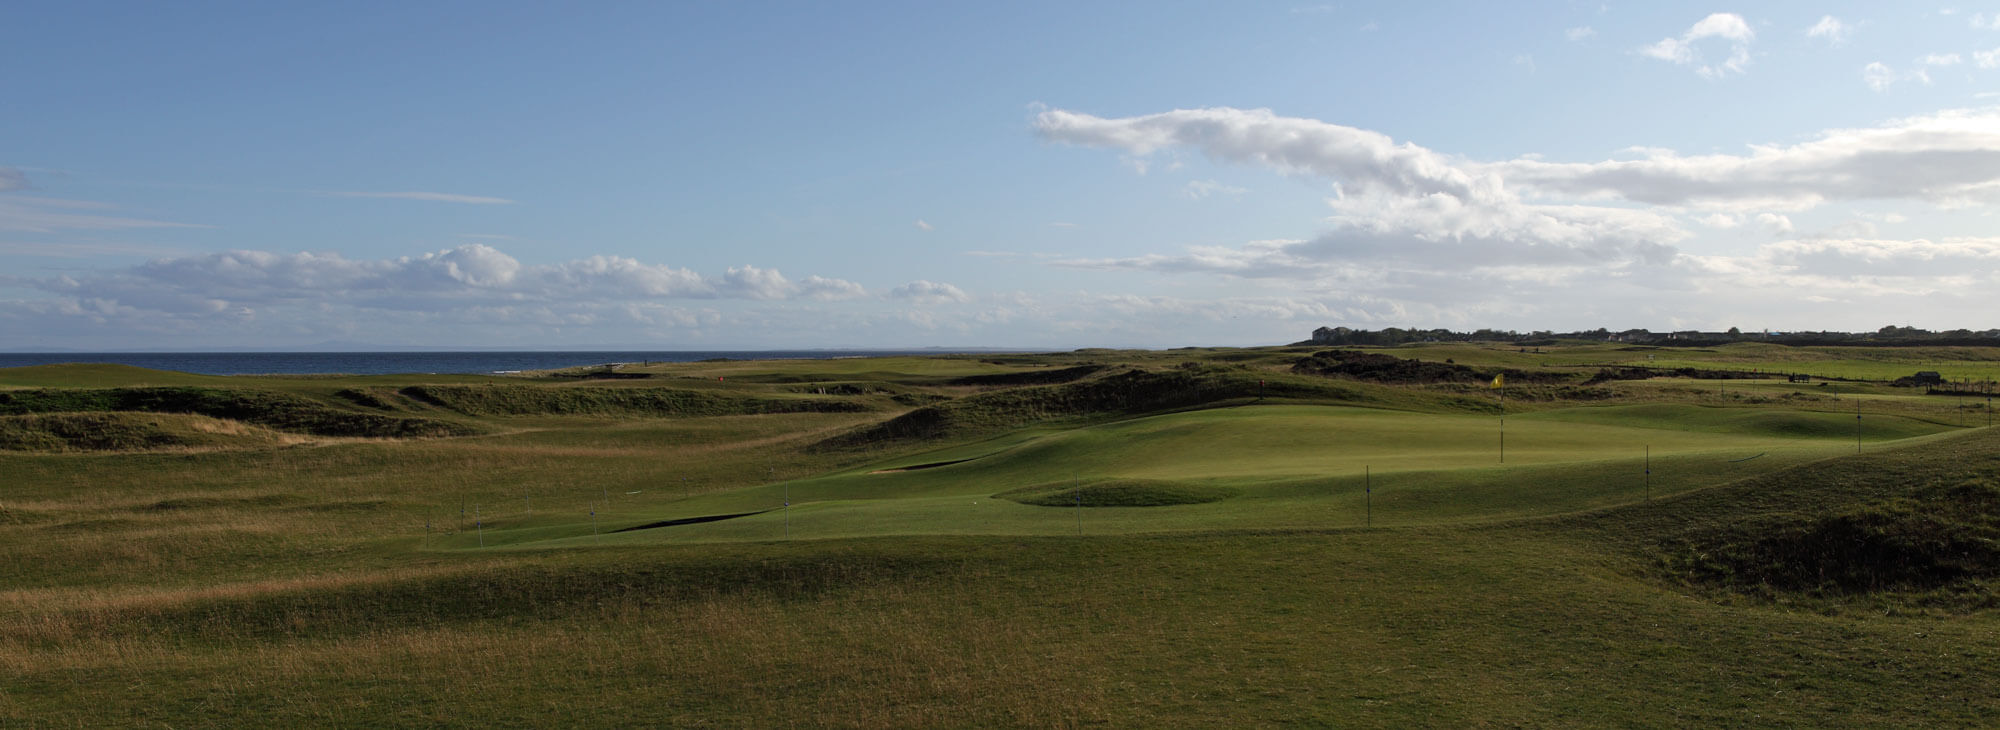 Brora golf links the cour